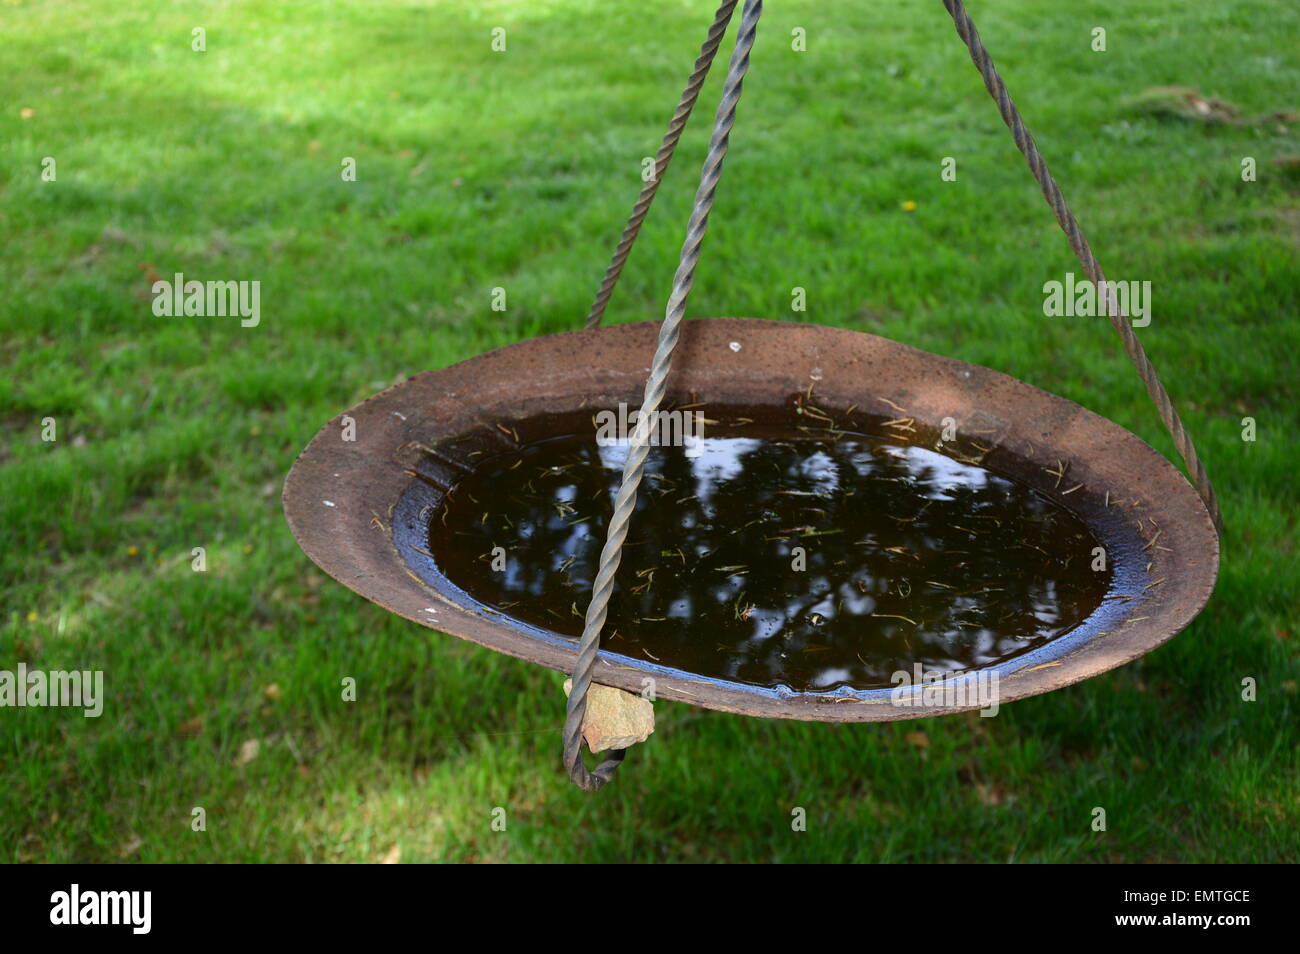 An imaginative water basin made of iron objects Stock Photo